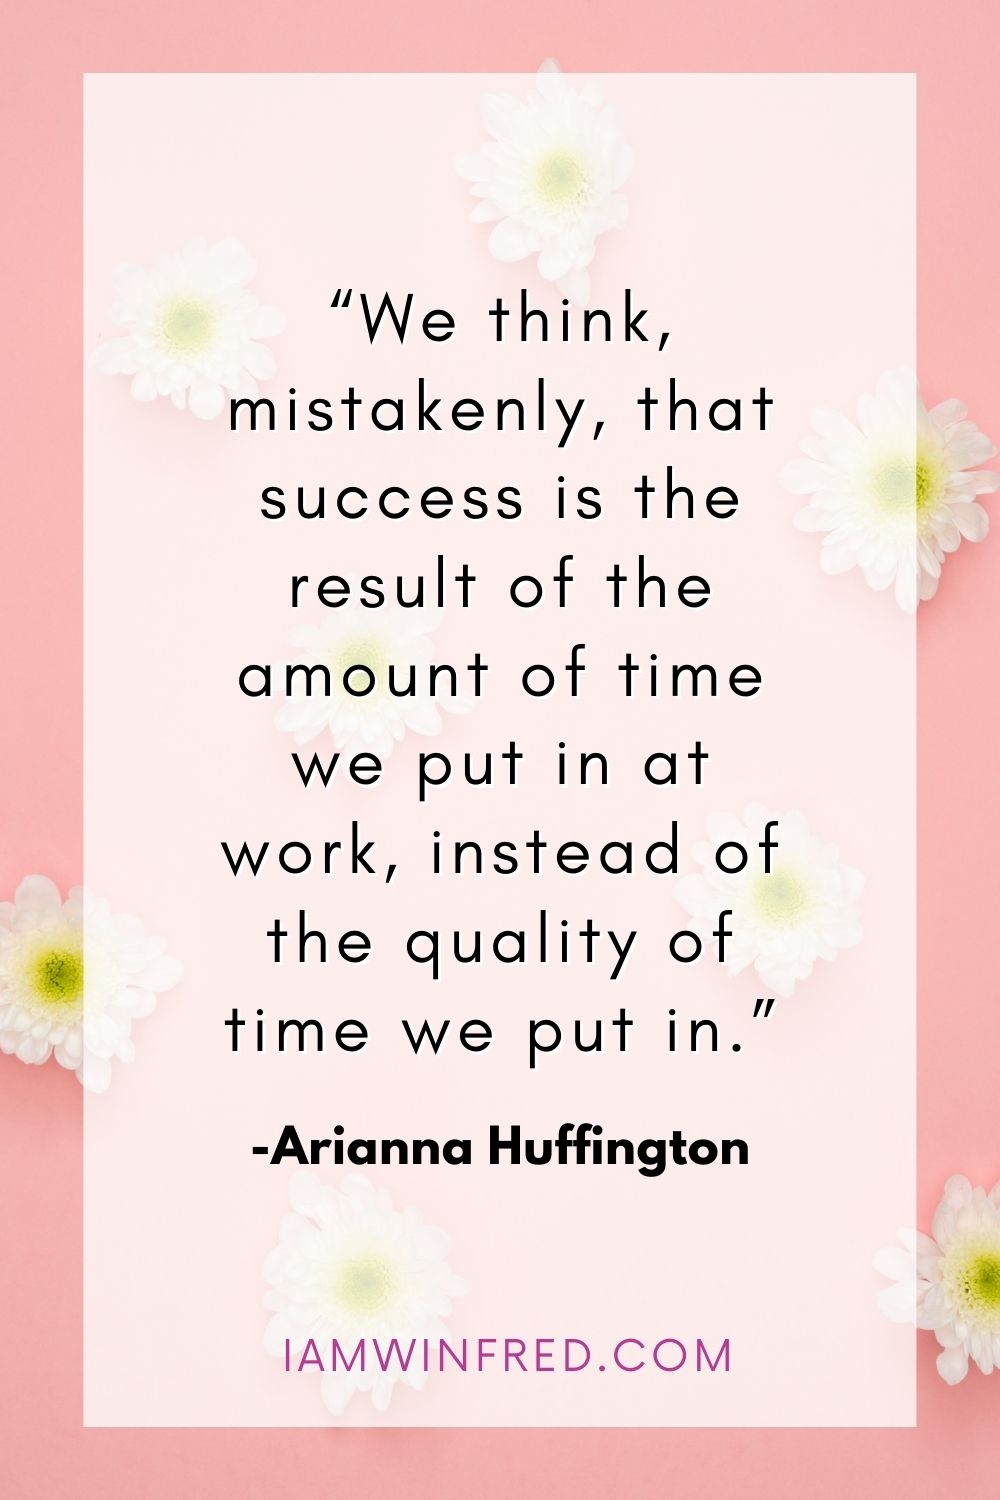 We Think Mistakenly That Success Is The Result Of The Amount Of Time We Put In At Work Instead Of The Quality Of Time We Put In.